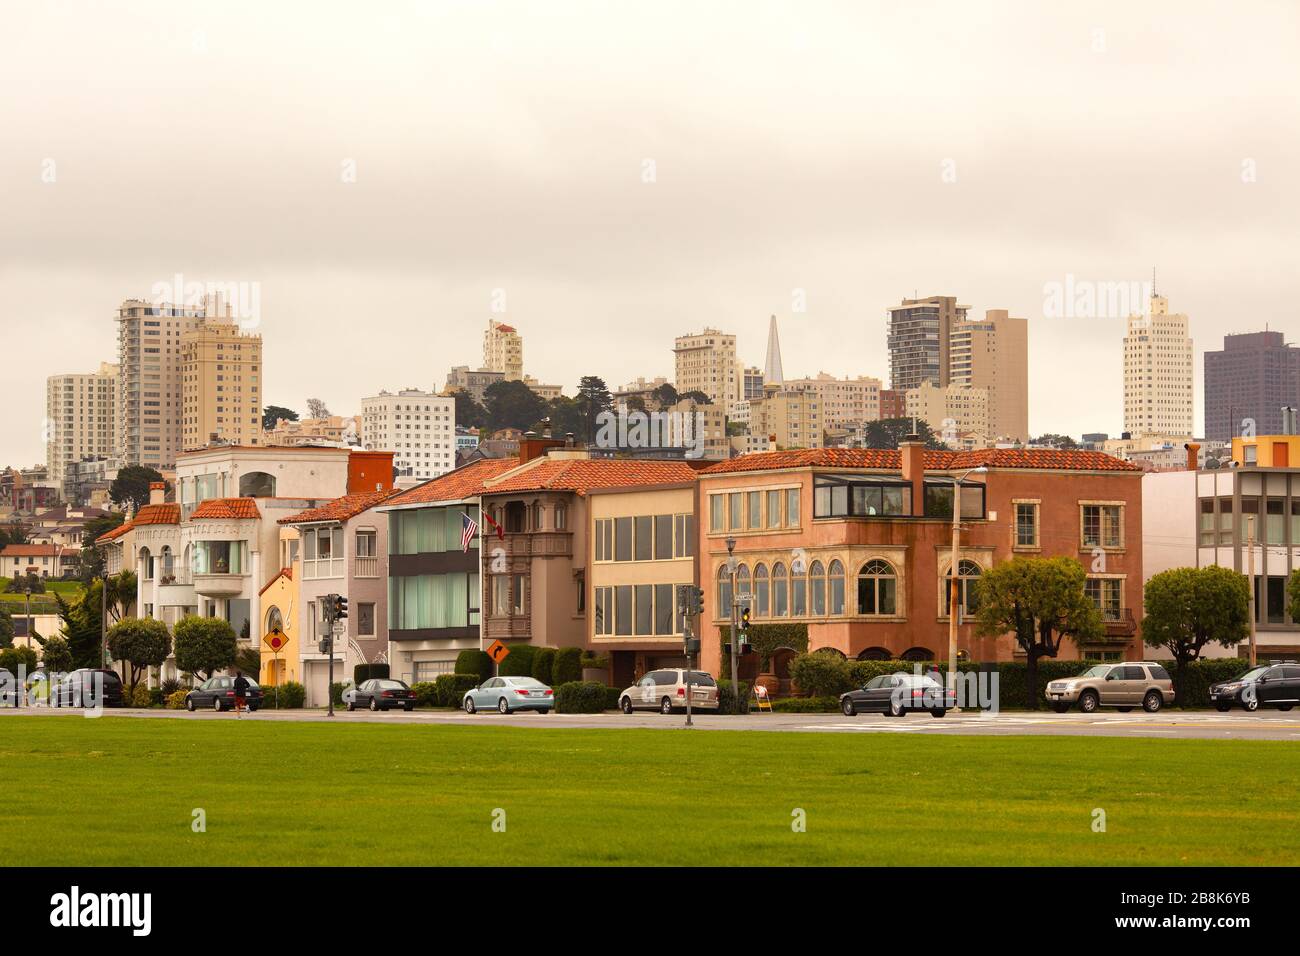 San Francisco, California, United States - Marina Boulevard and skyline of the hills in the back. Stock Photo